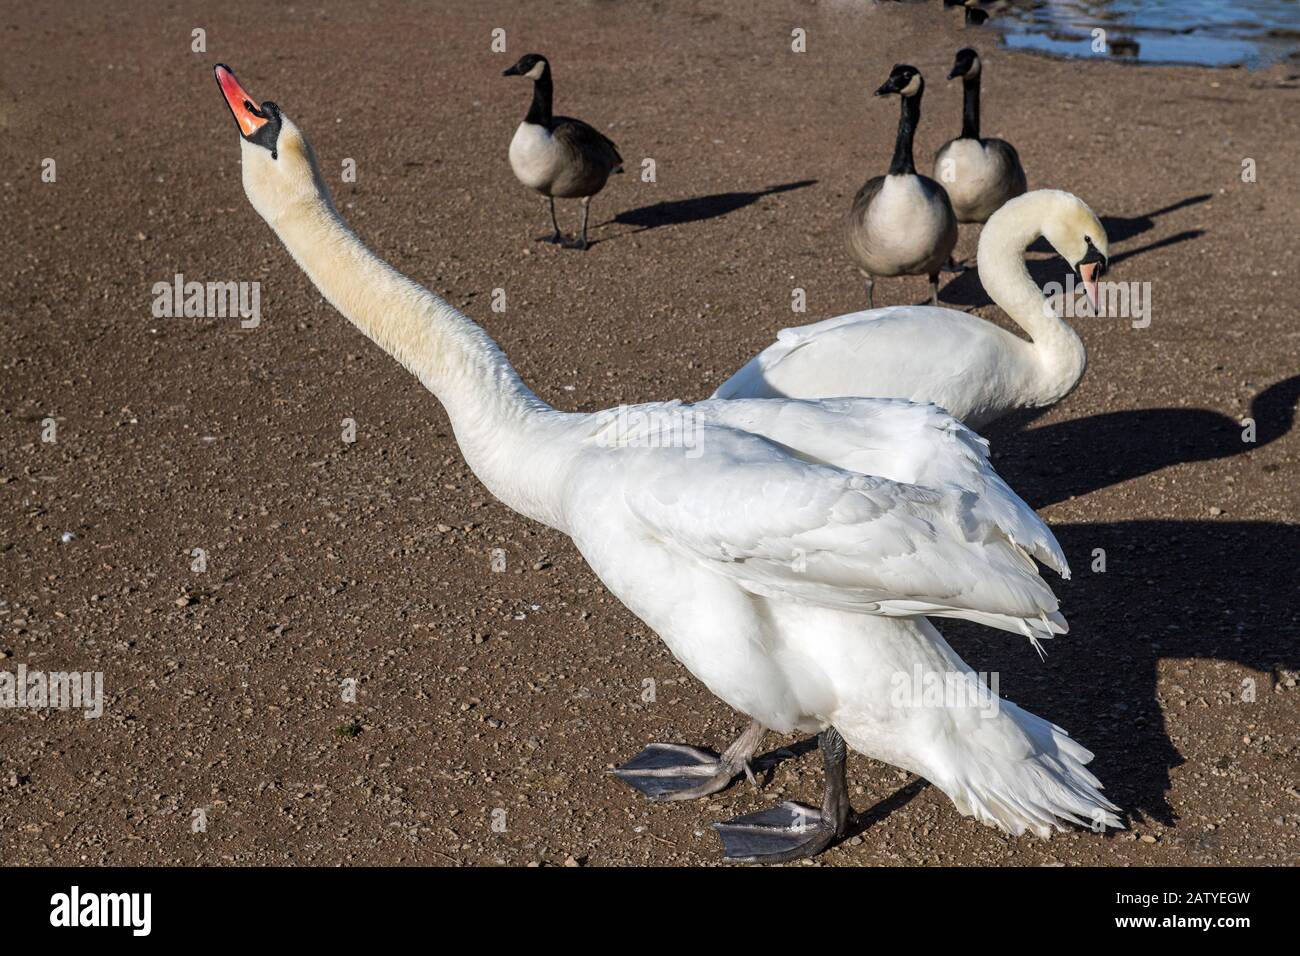 Mute swan or Cygnus olor at Cosmeston Lake in Penarth showing one of various poses Stock Photo